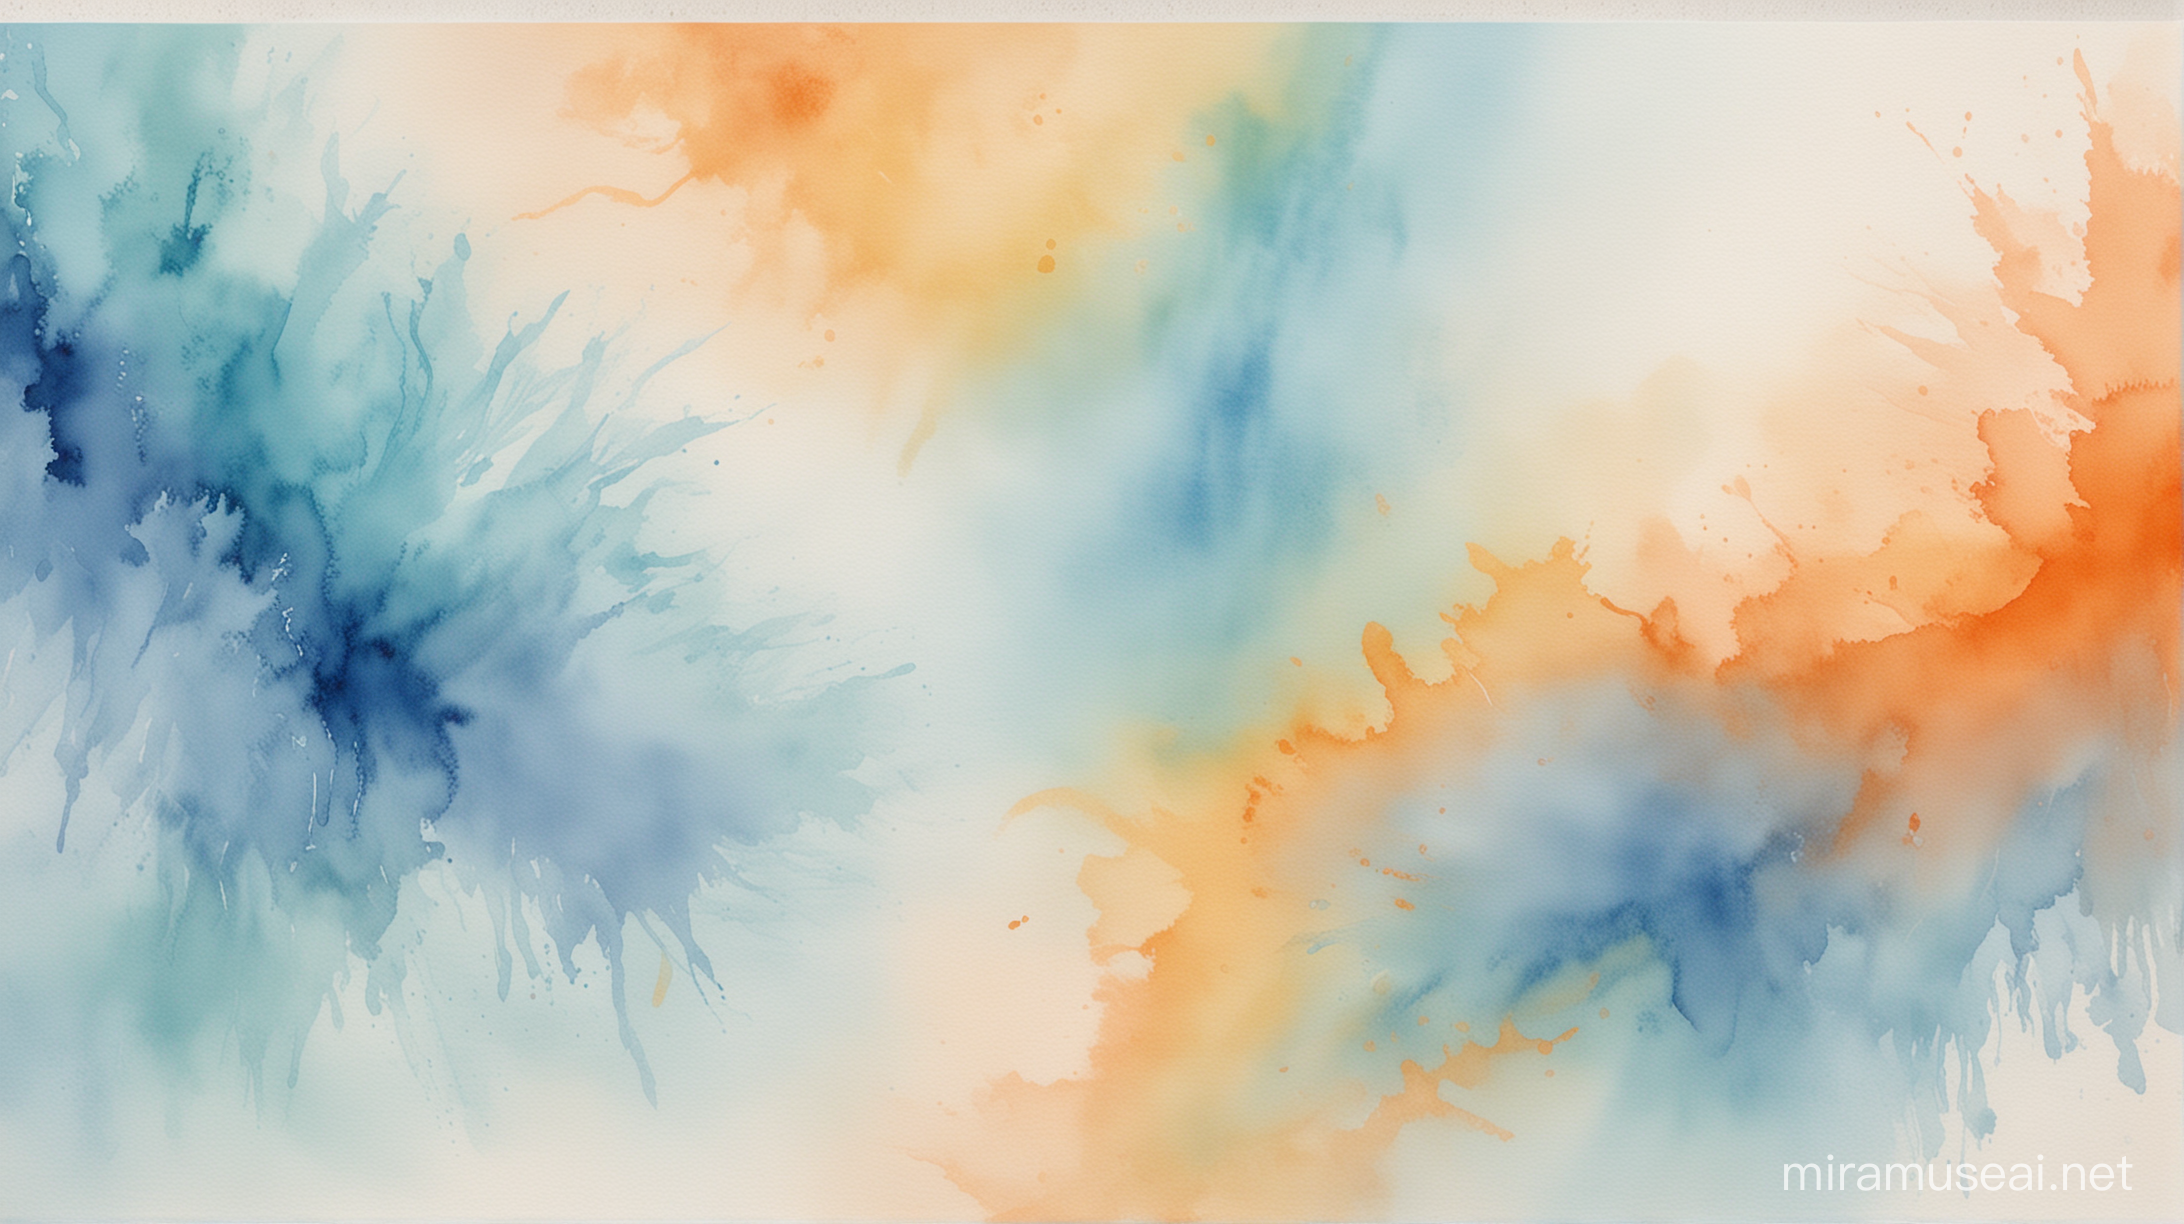 a watercolor abstract background image containing soft colors of blue and orange.